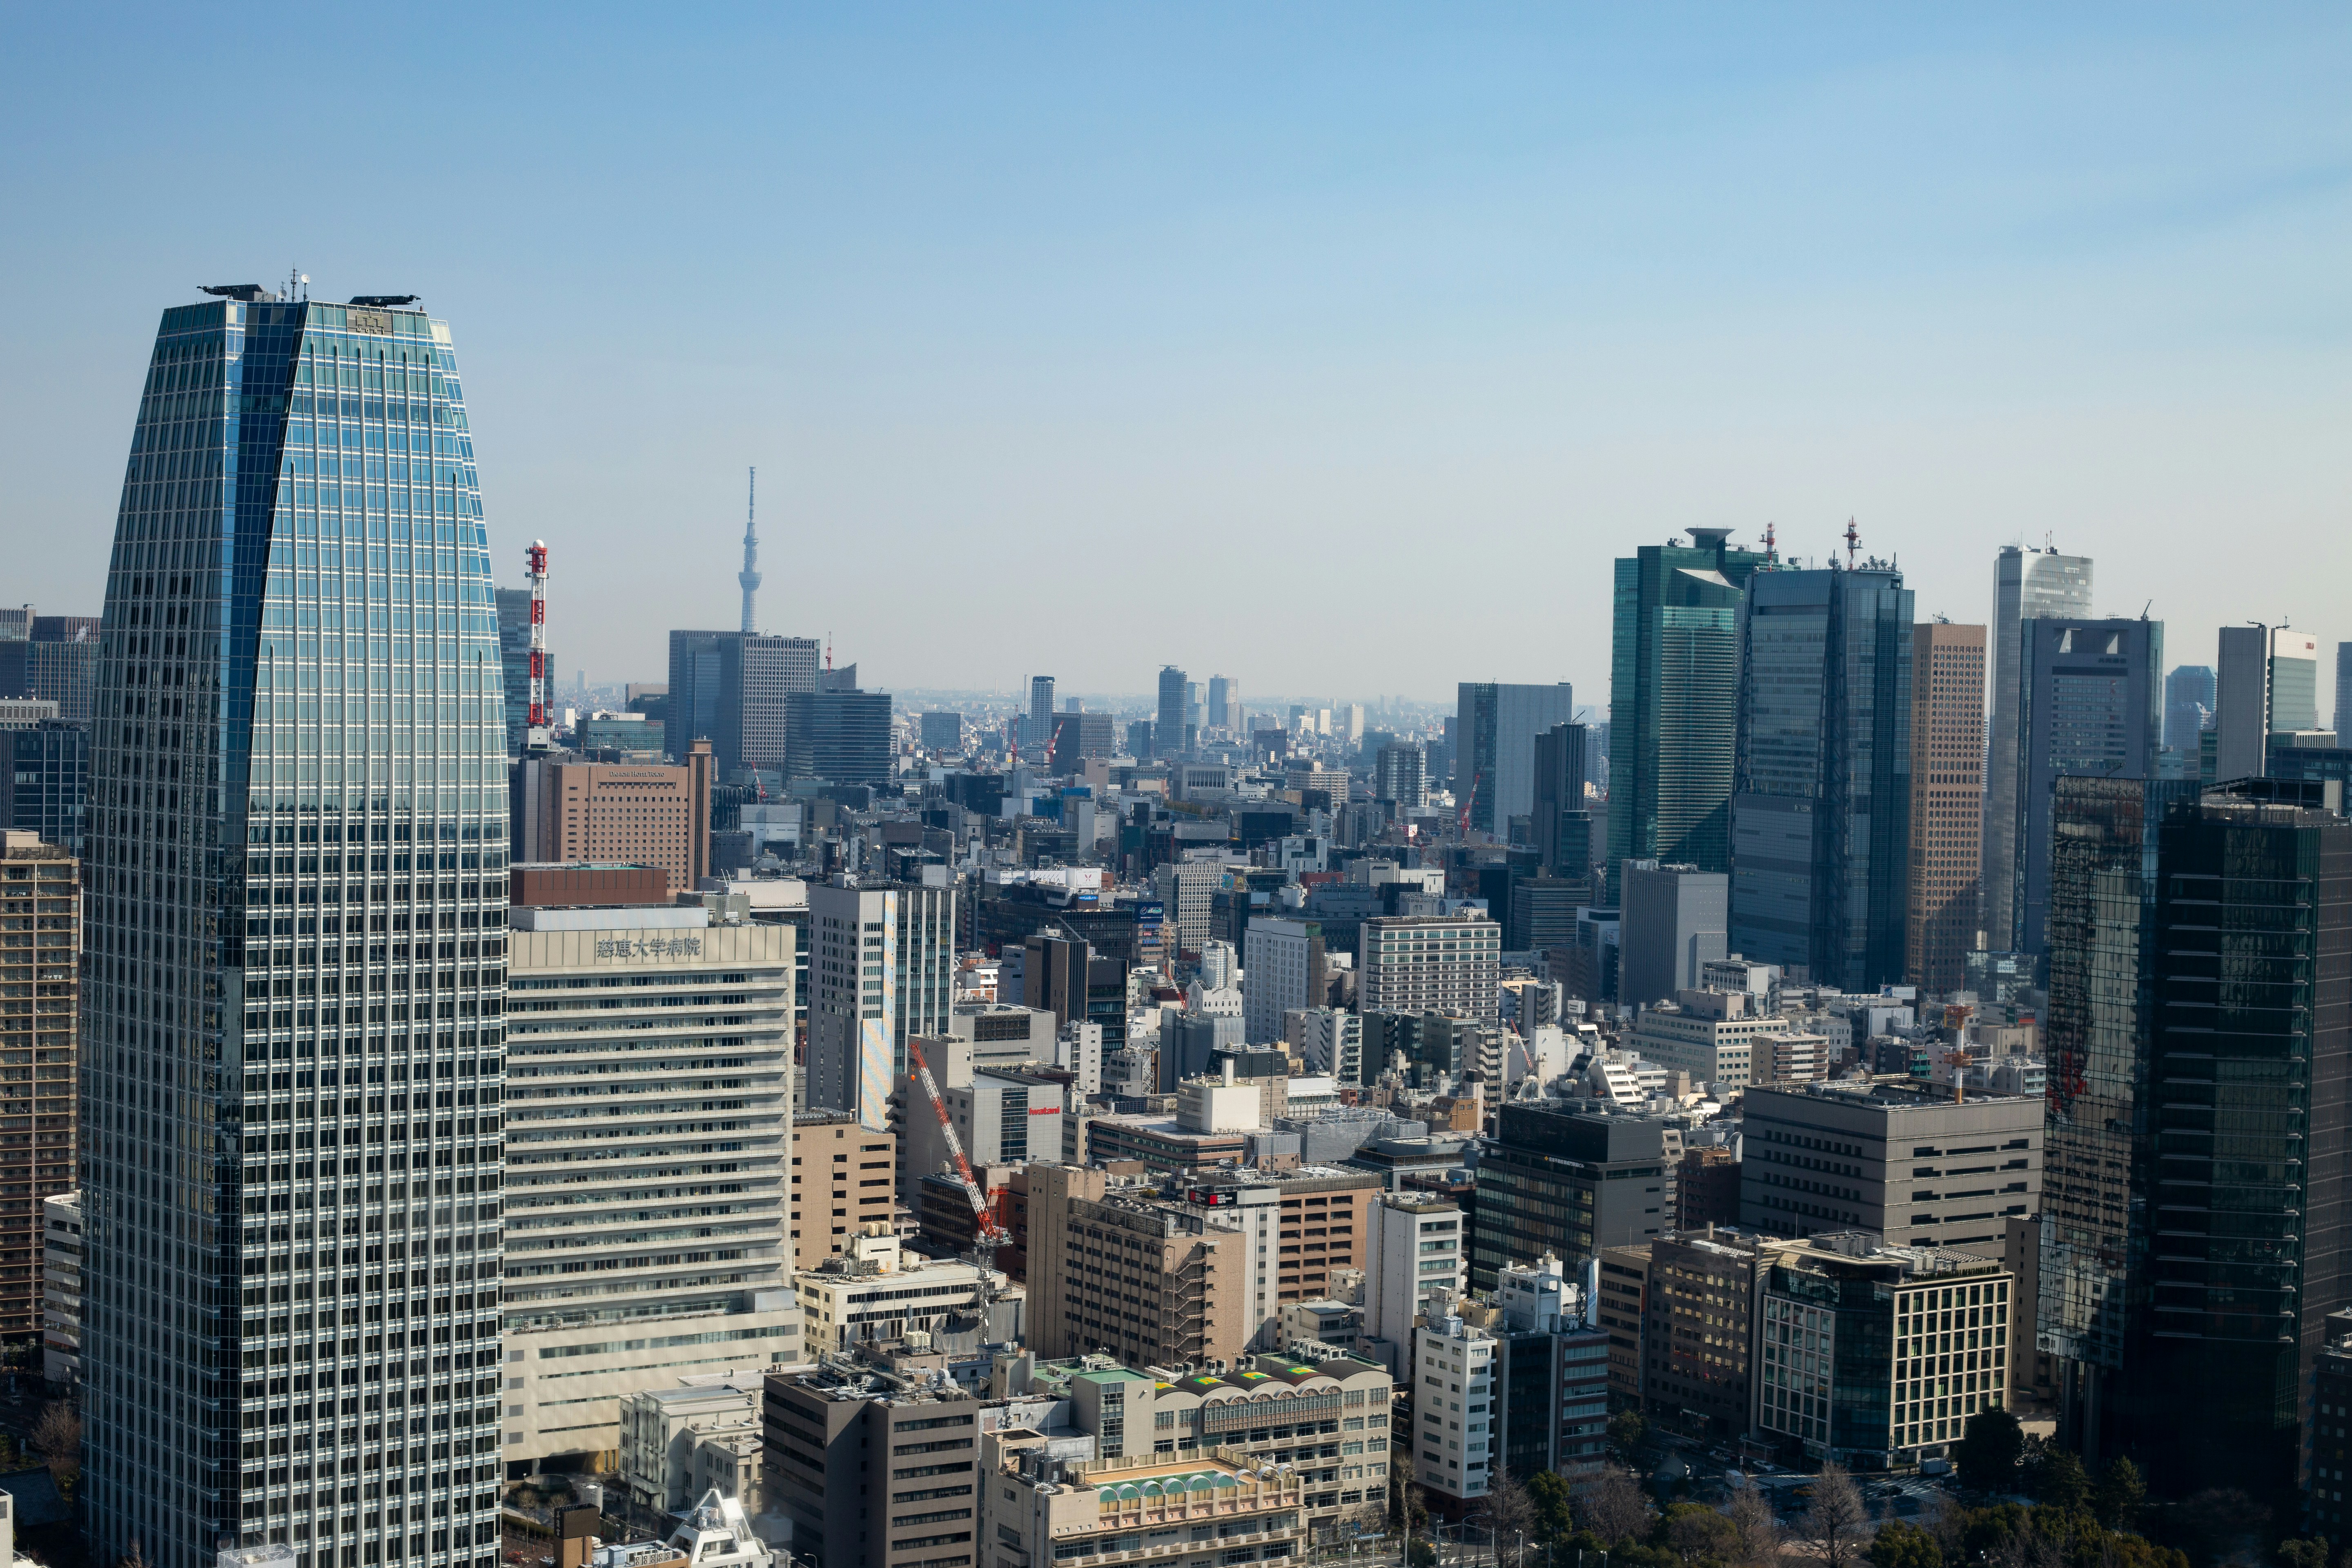 View of Tokyo from Tokyo Tower